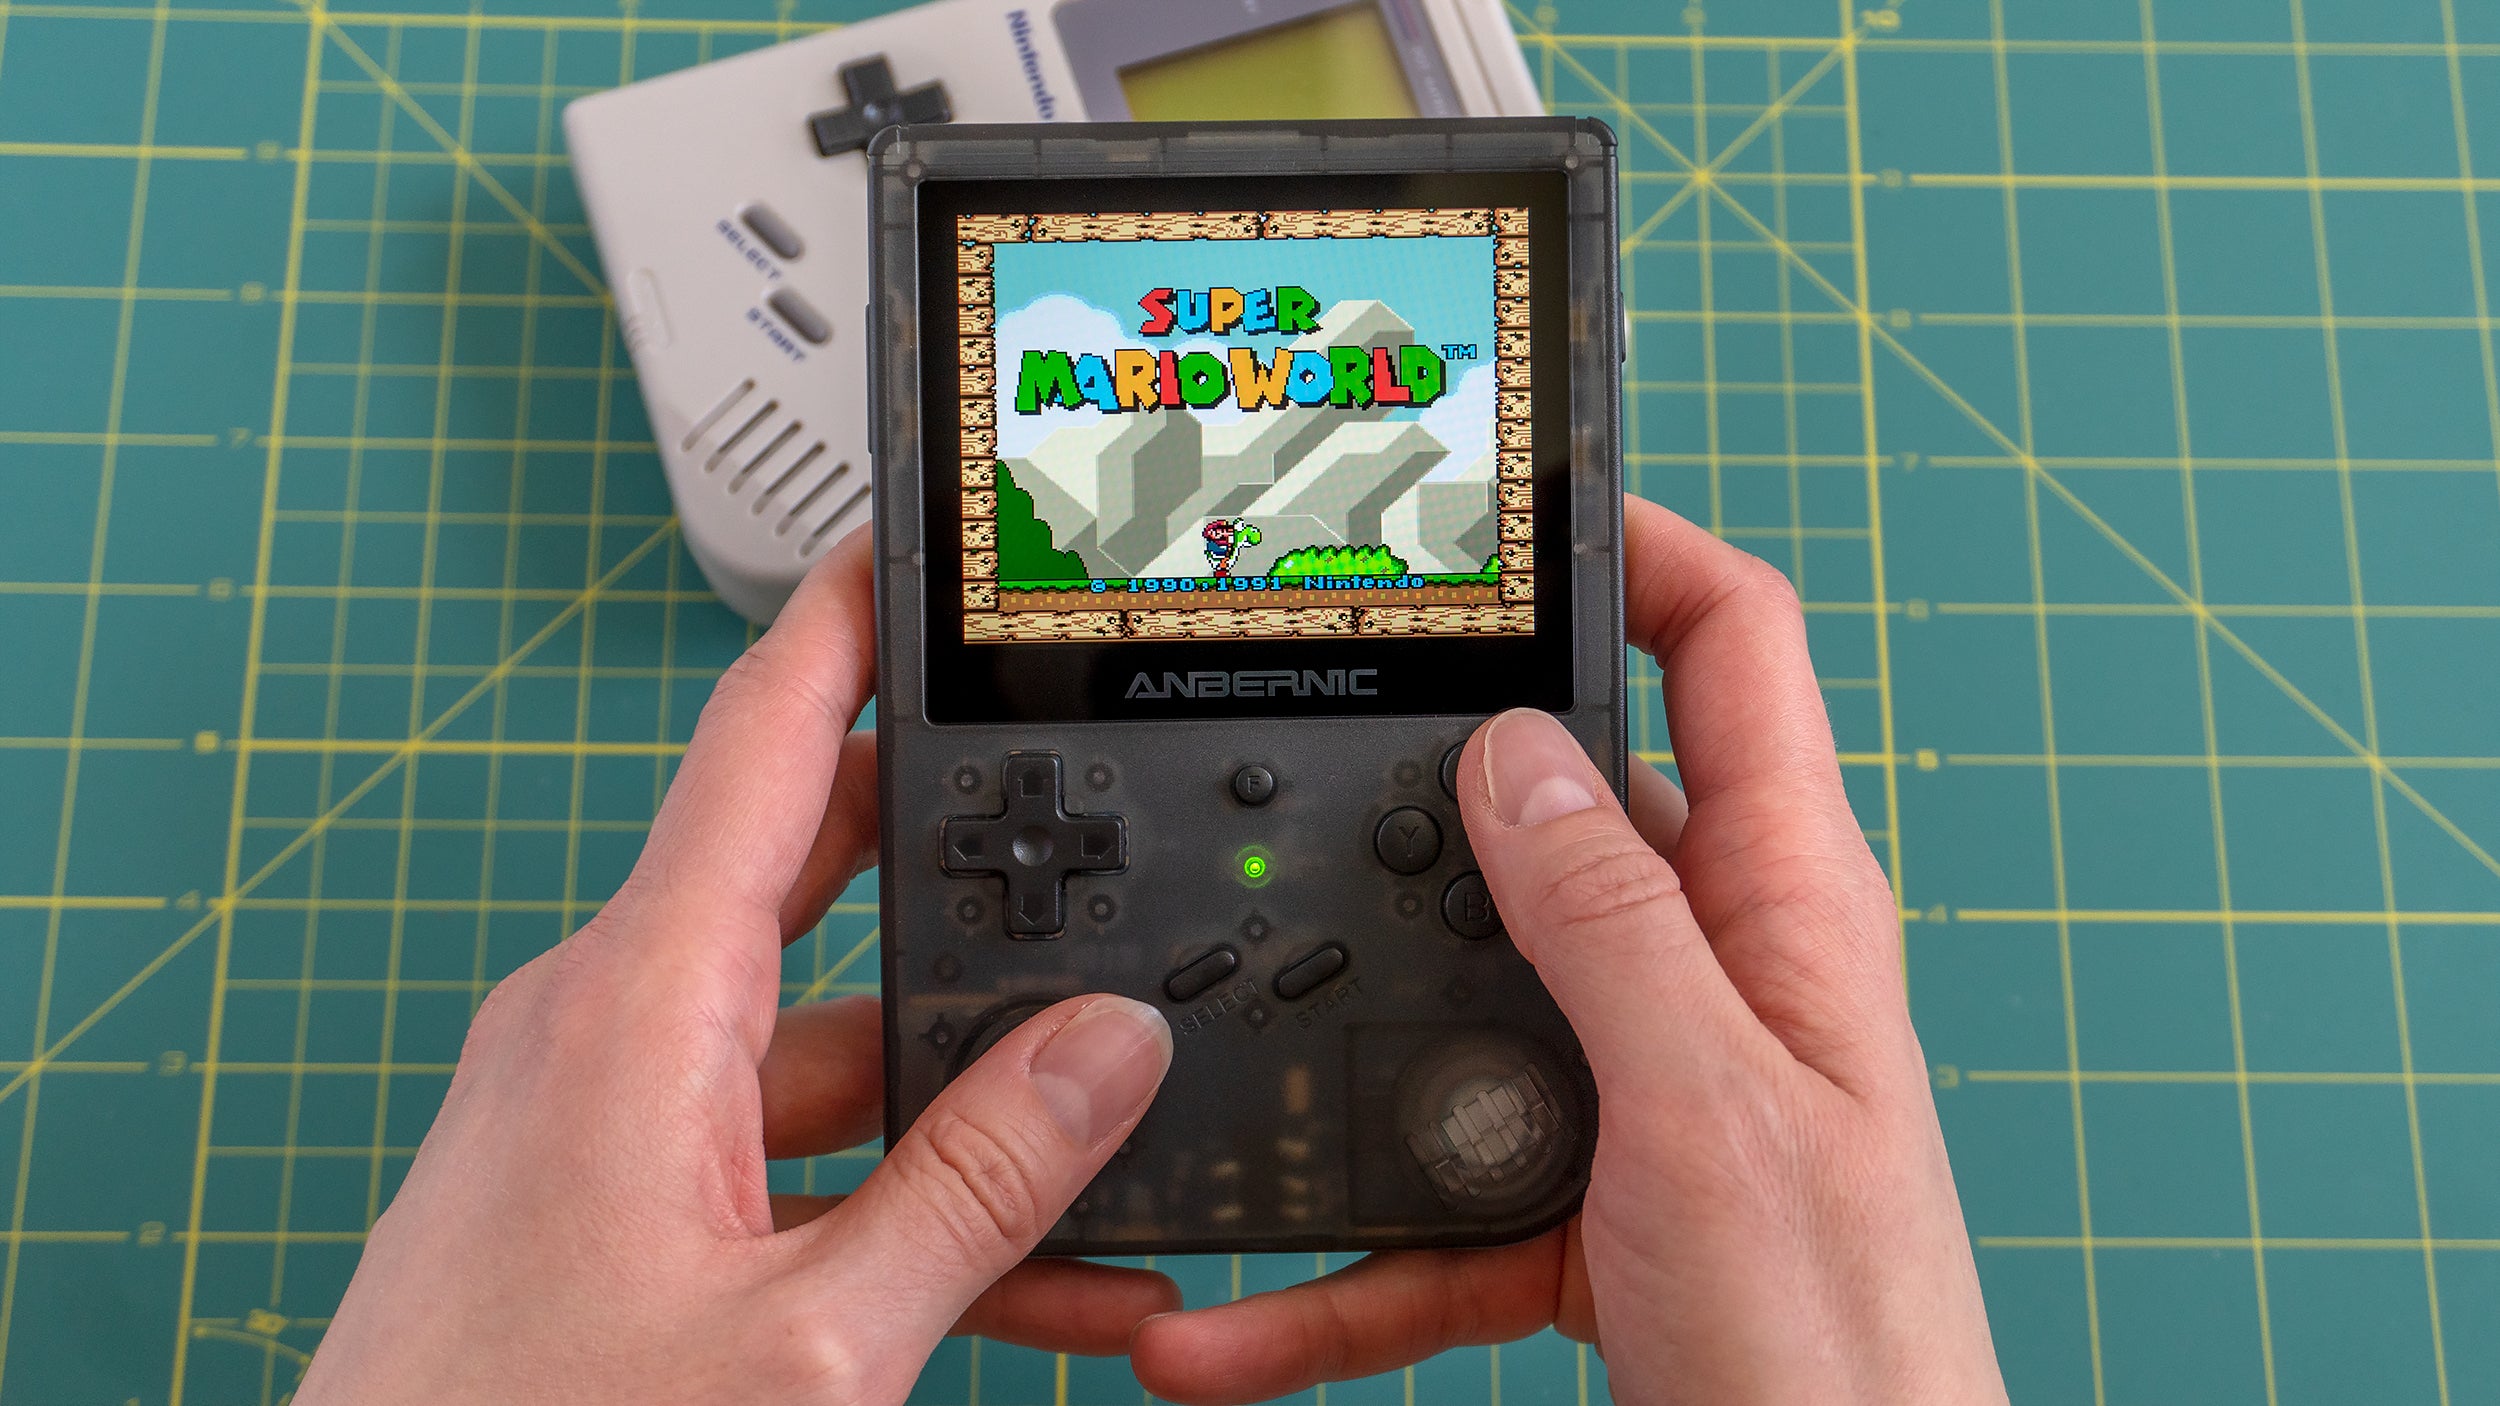 Like the original Game Boy, the RG351V is a beefy handheld console you'll struggle to squeeze into a pocket. (Photo: Andrew Liszewski/Gizmodo)